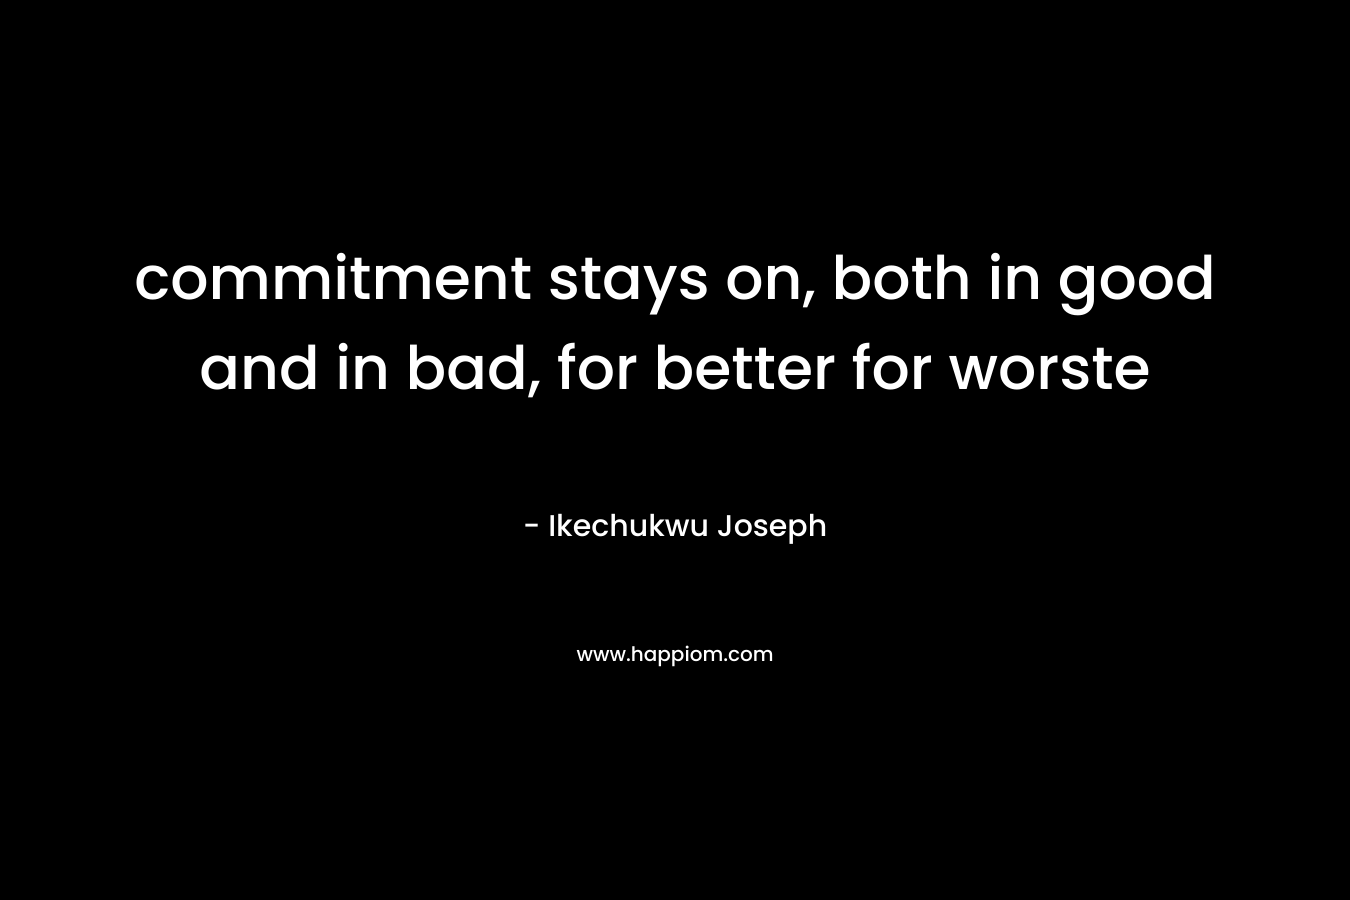 commitment stays on, both in good and in bad, for better for worste